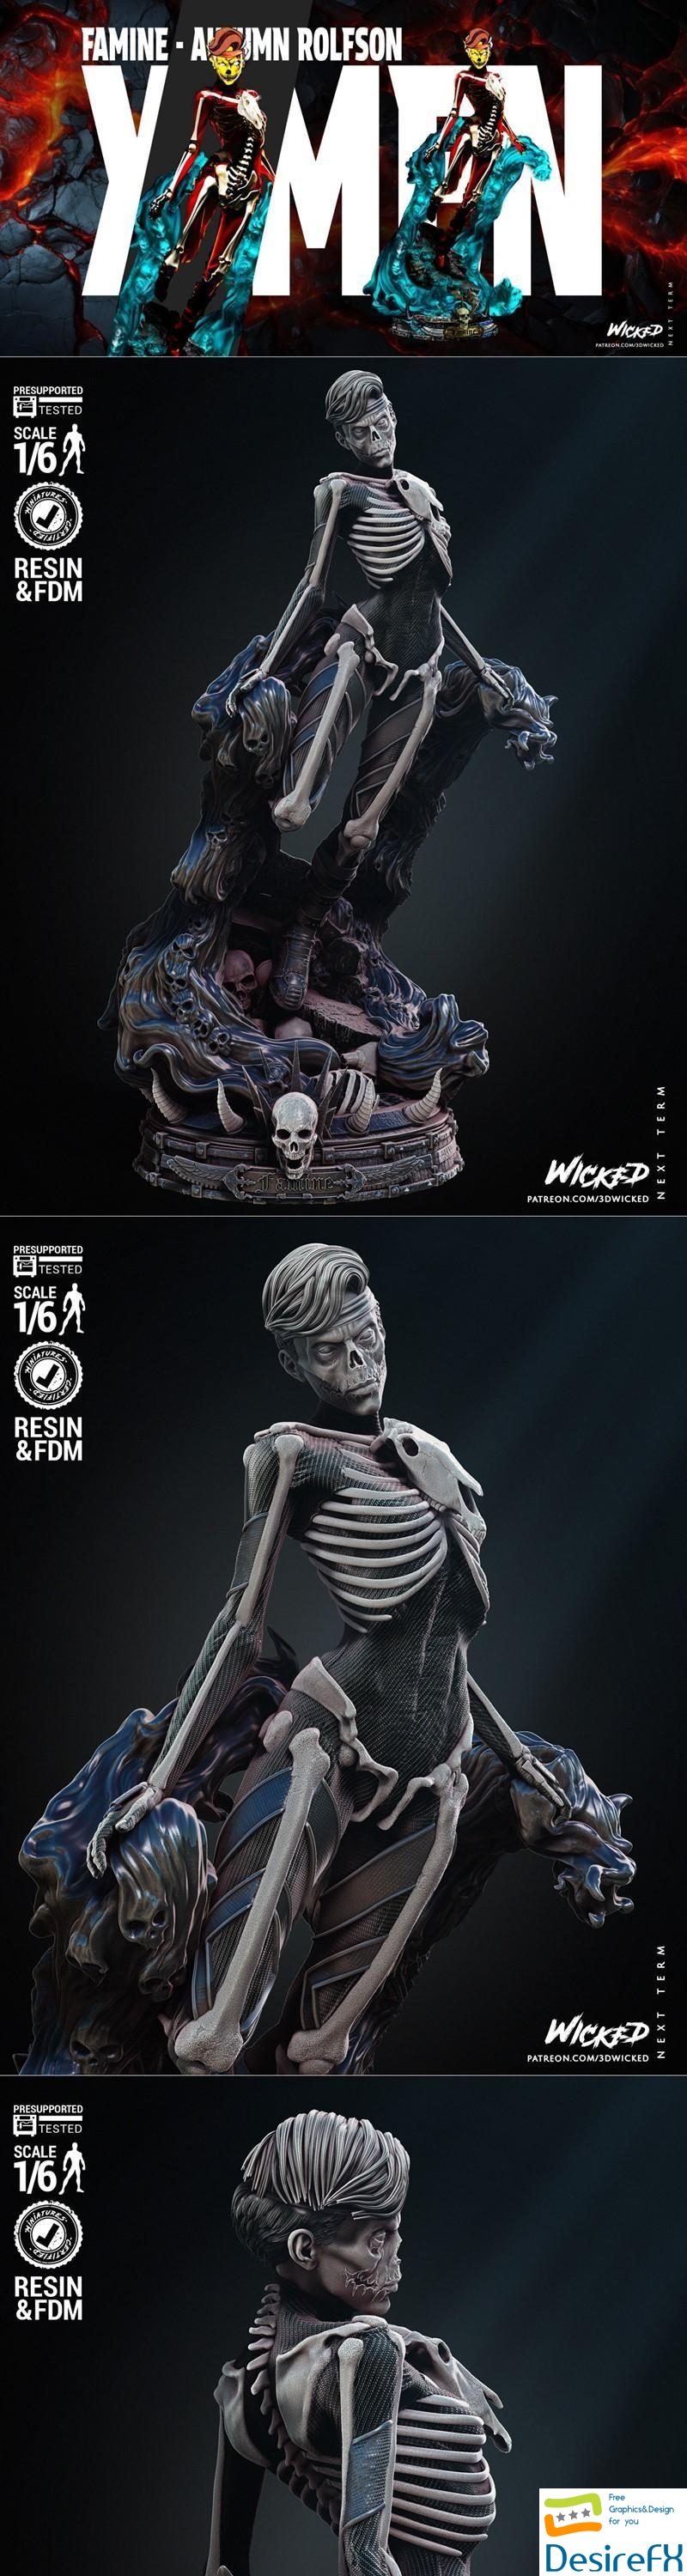 Wicked - Famine Sculpture 3D Print